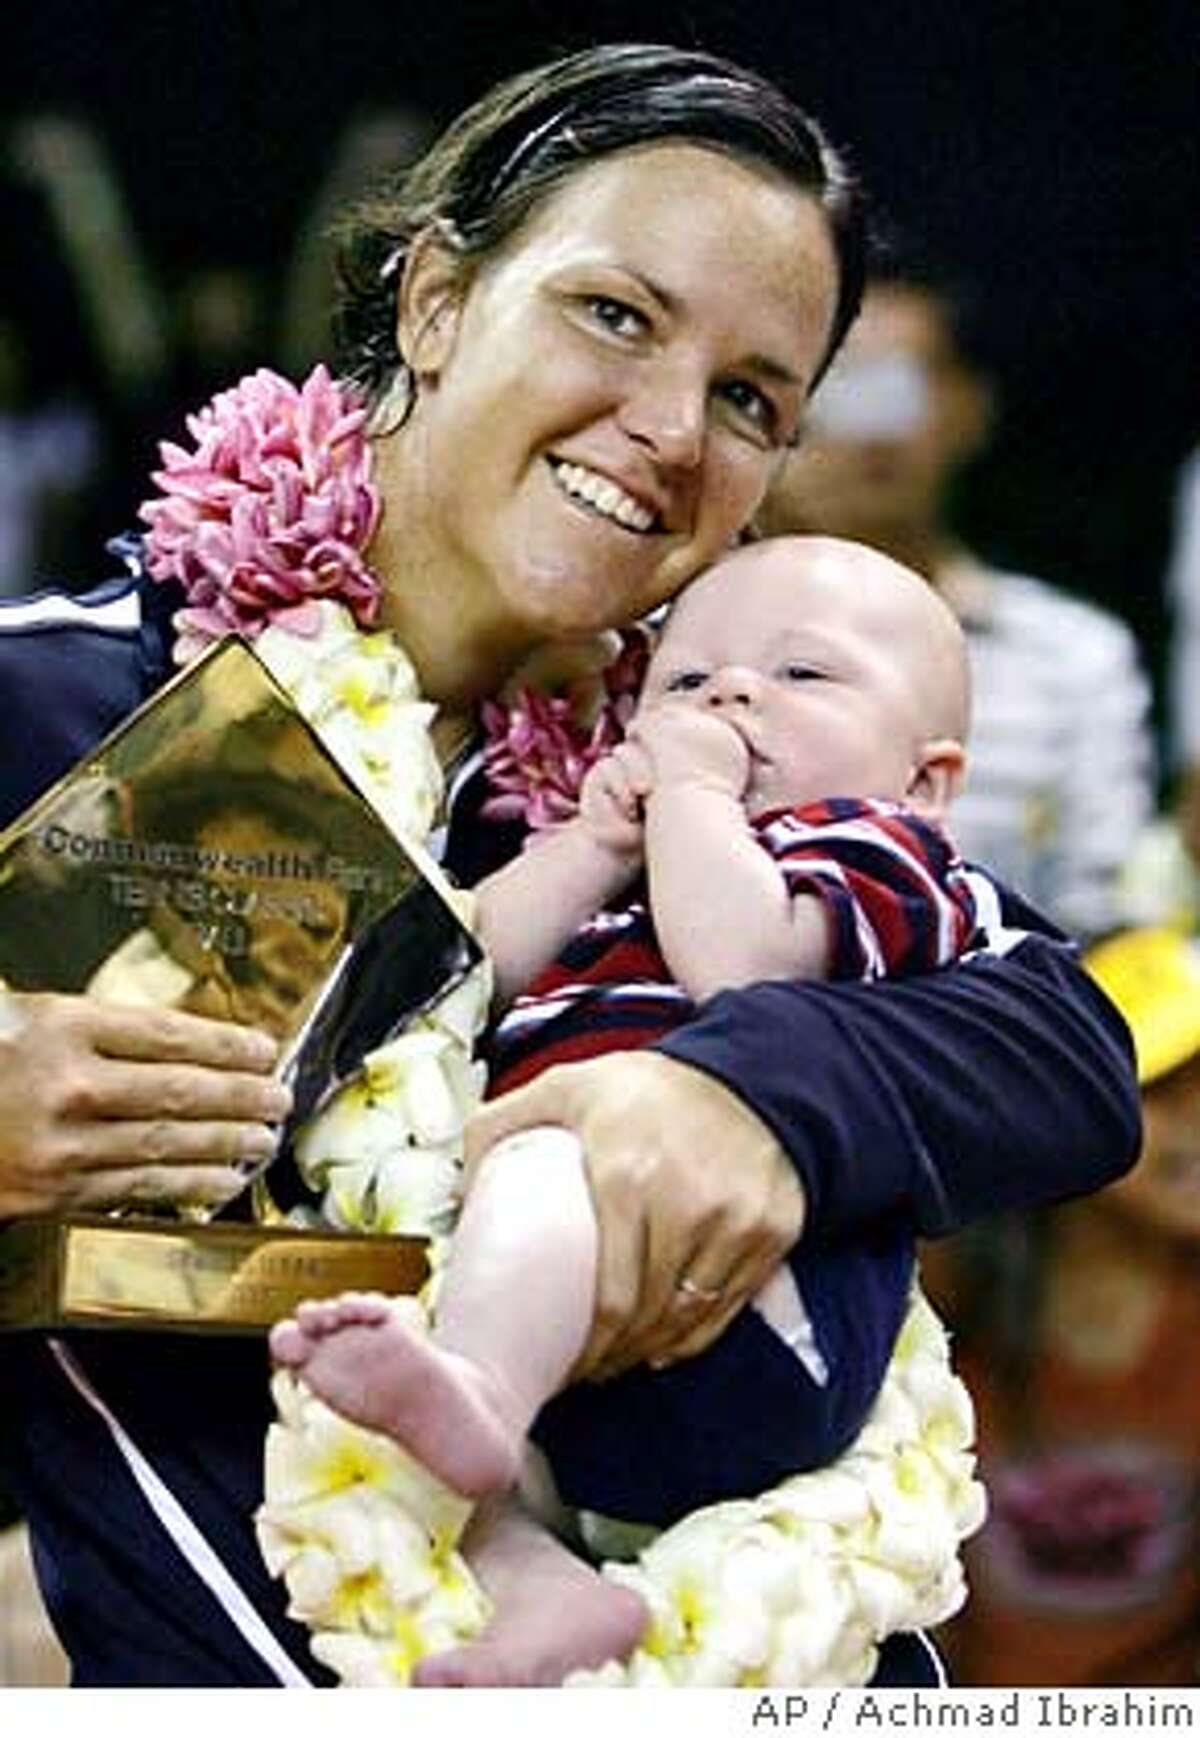 Lindsay Davenport of the USA holds her baby Jagger Jonathan Leach, 3 , after her victory over Daniela Hantuchova of sovlakia during a final match of the WTA Bali Open tennis tournament in Nusa Dua, Bali, Indonesia, Sunday, Sept 16, 2007. Davenport won 6-4,3-6, 6-2. (AP Photo/Achmad Ibrahim)